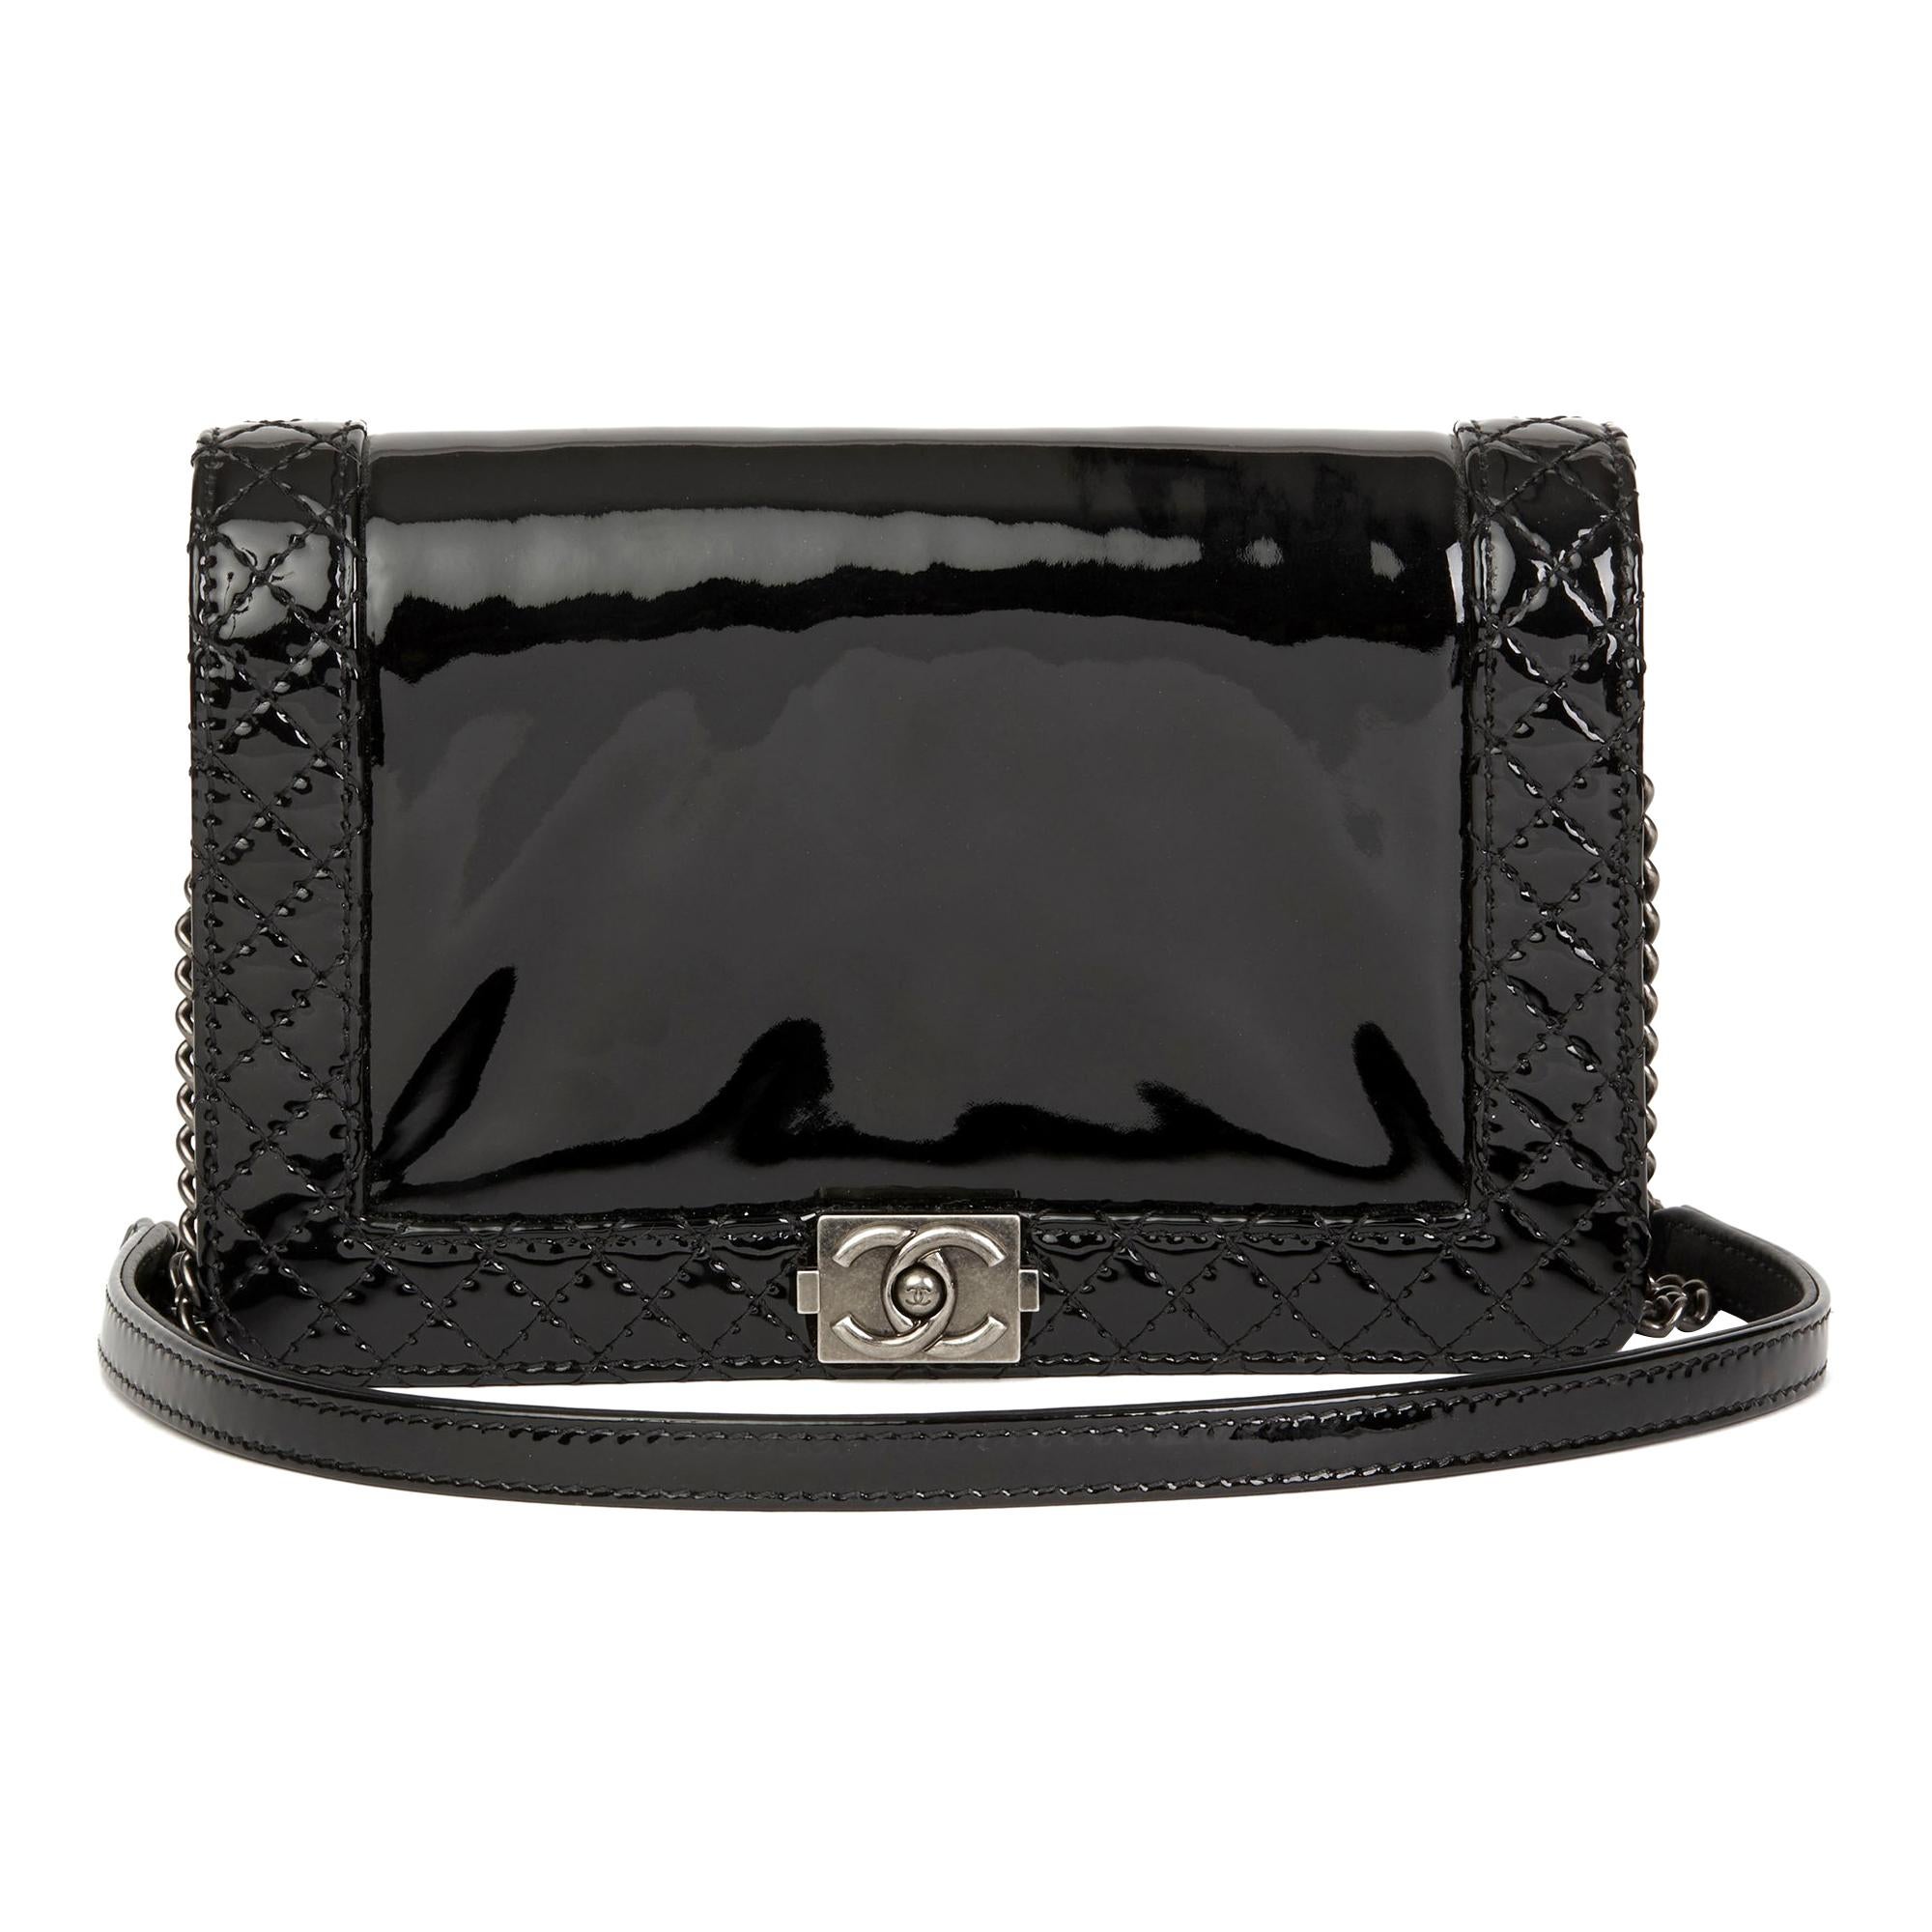 2013 Chanel Black Quilted Patent Leather Small Le Boy Reverso